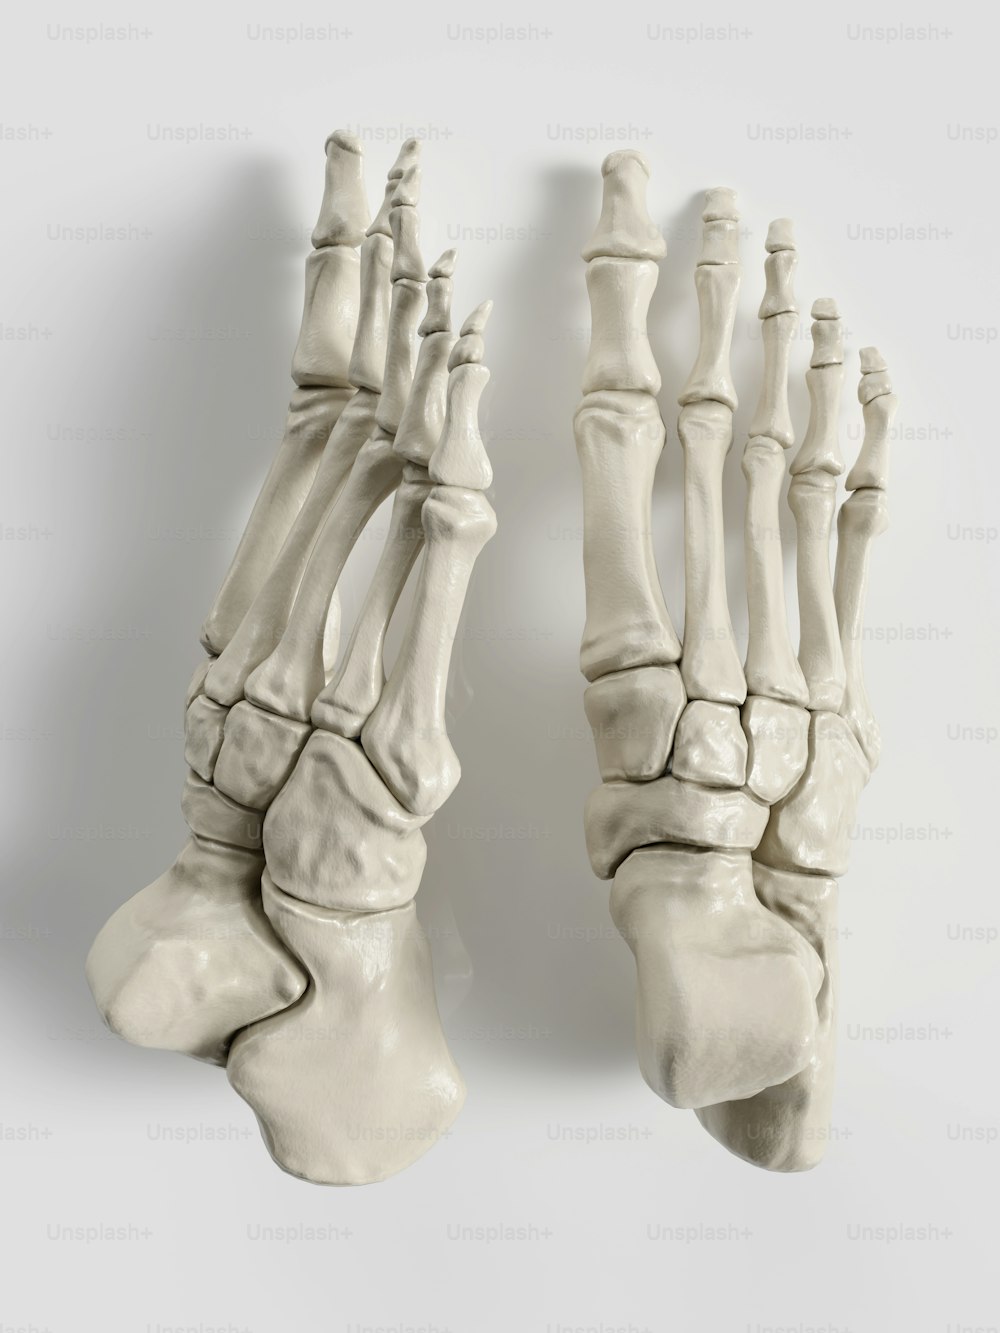 a pair of bones of a human hand and foot